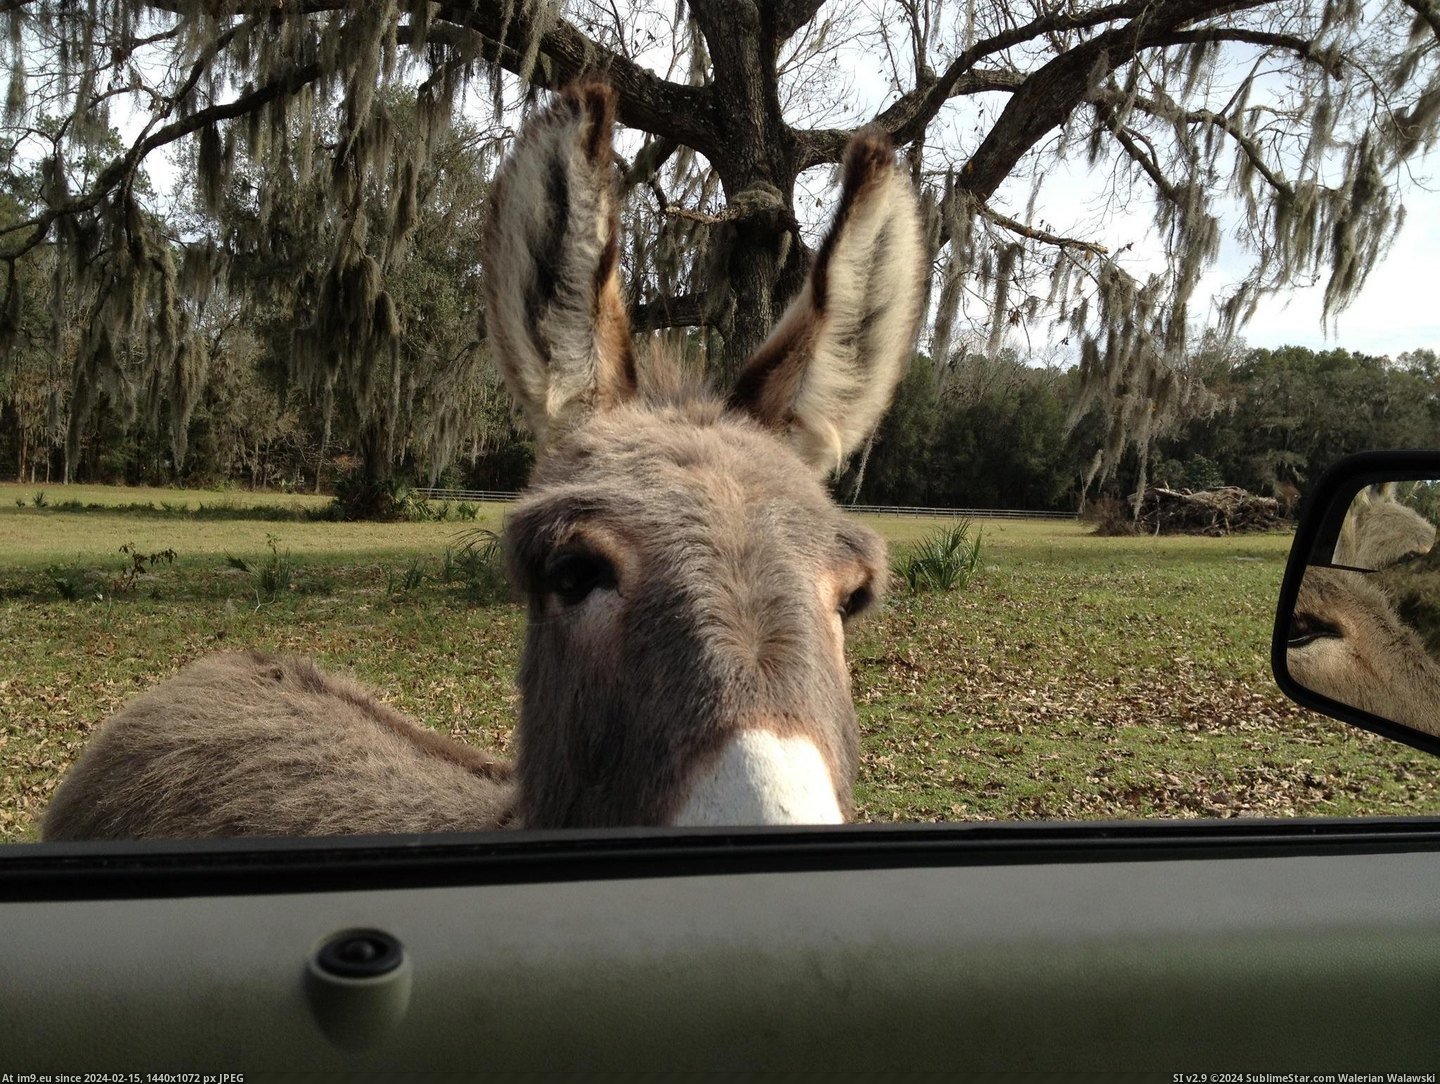 #Funny #Head #Mini #Scratch #Donkey #Neighbor #Chase #Driveway [Funny] My neighbor has a mini donkey that will chase you up the driveway until you scratch his head. 1 Pic. (Image of album My r/FUNNY favs))